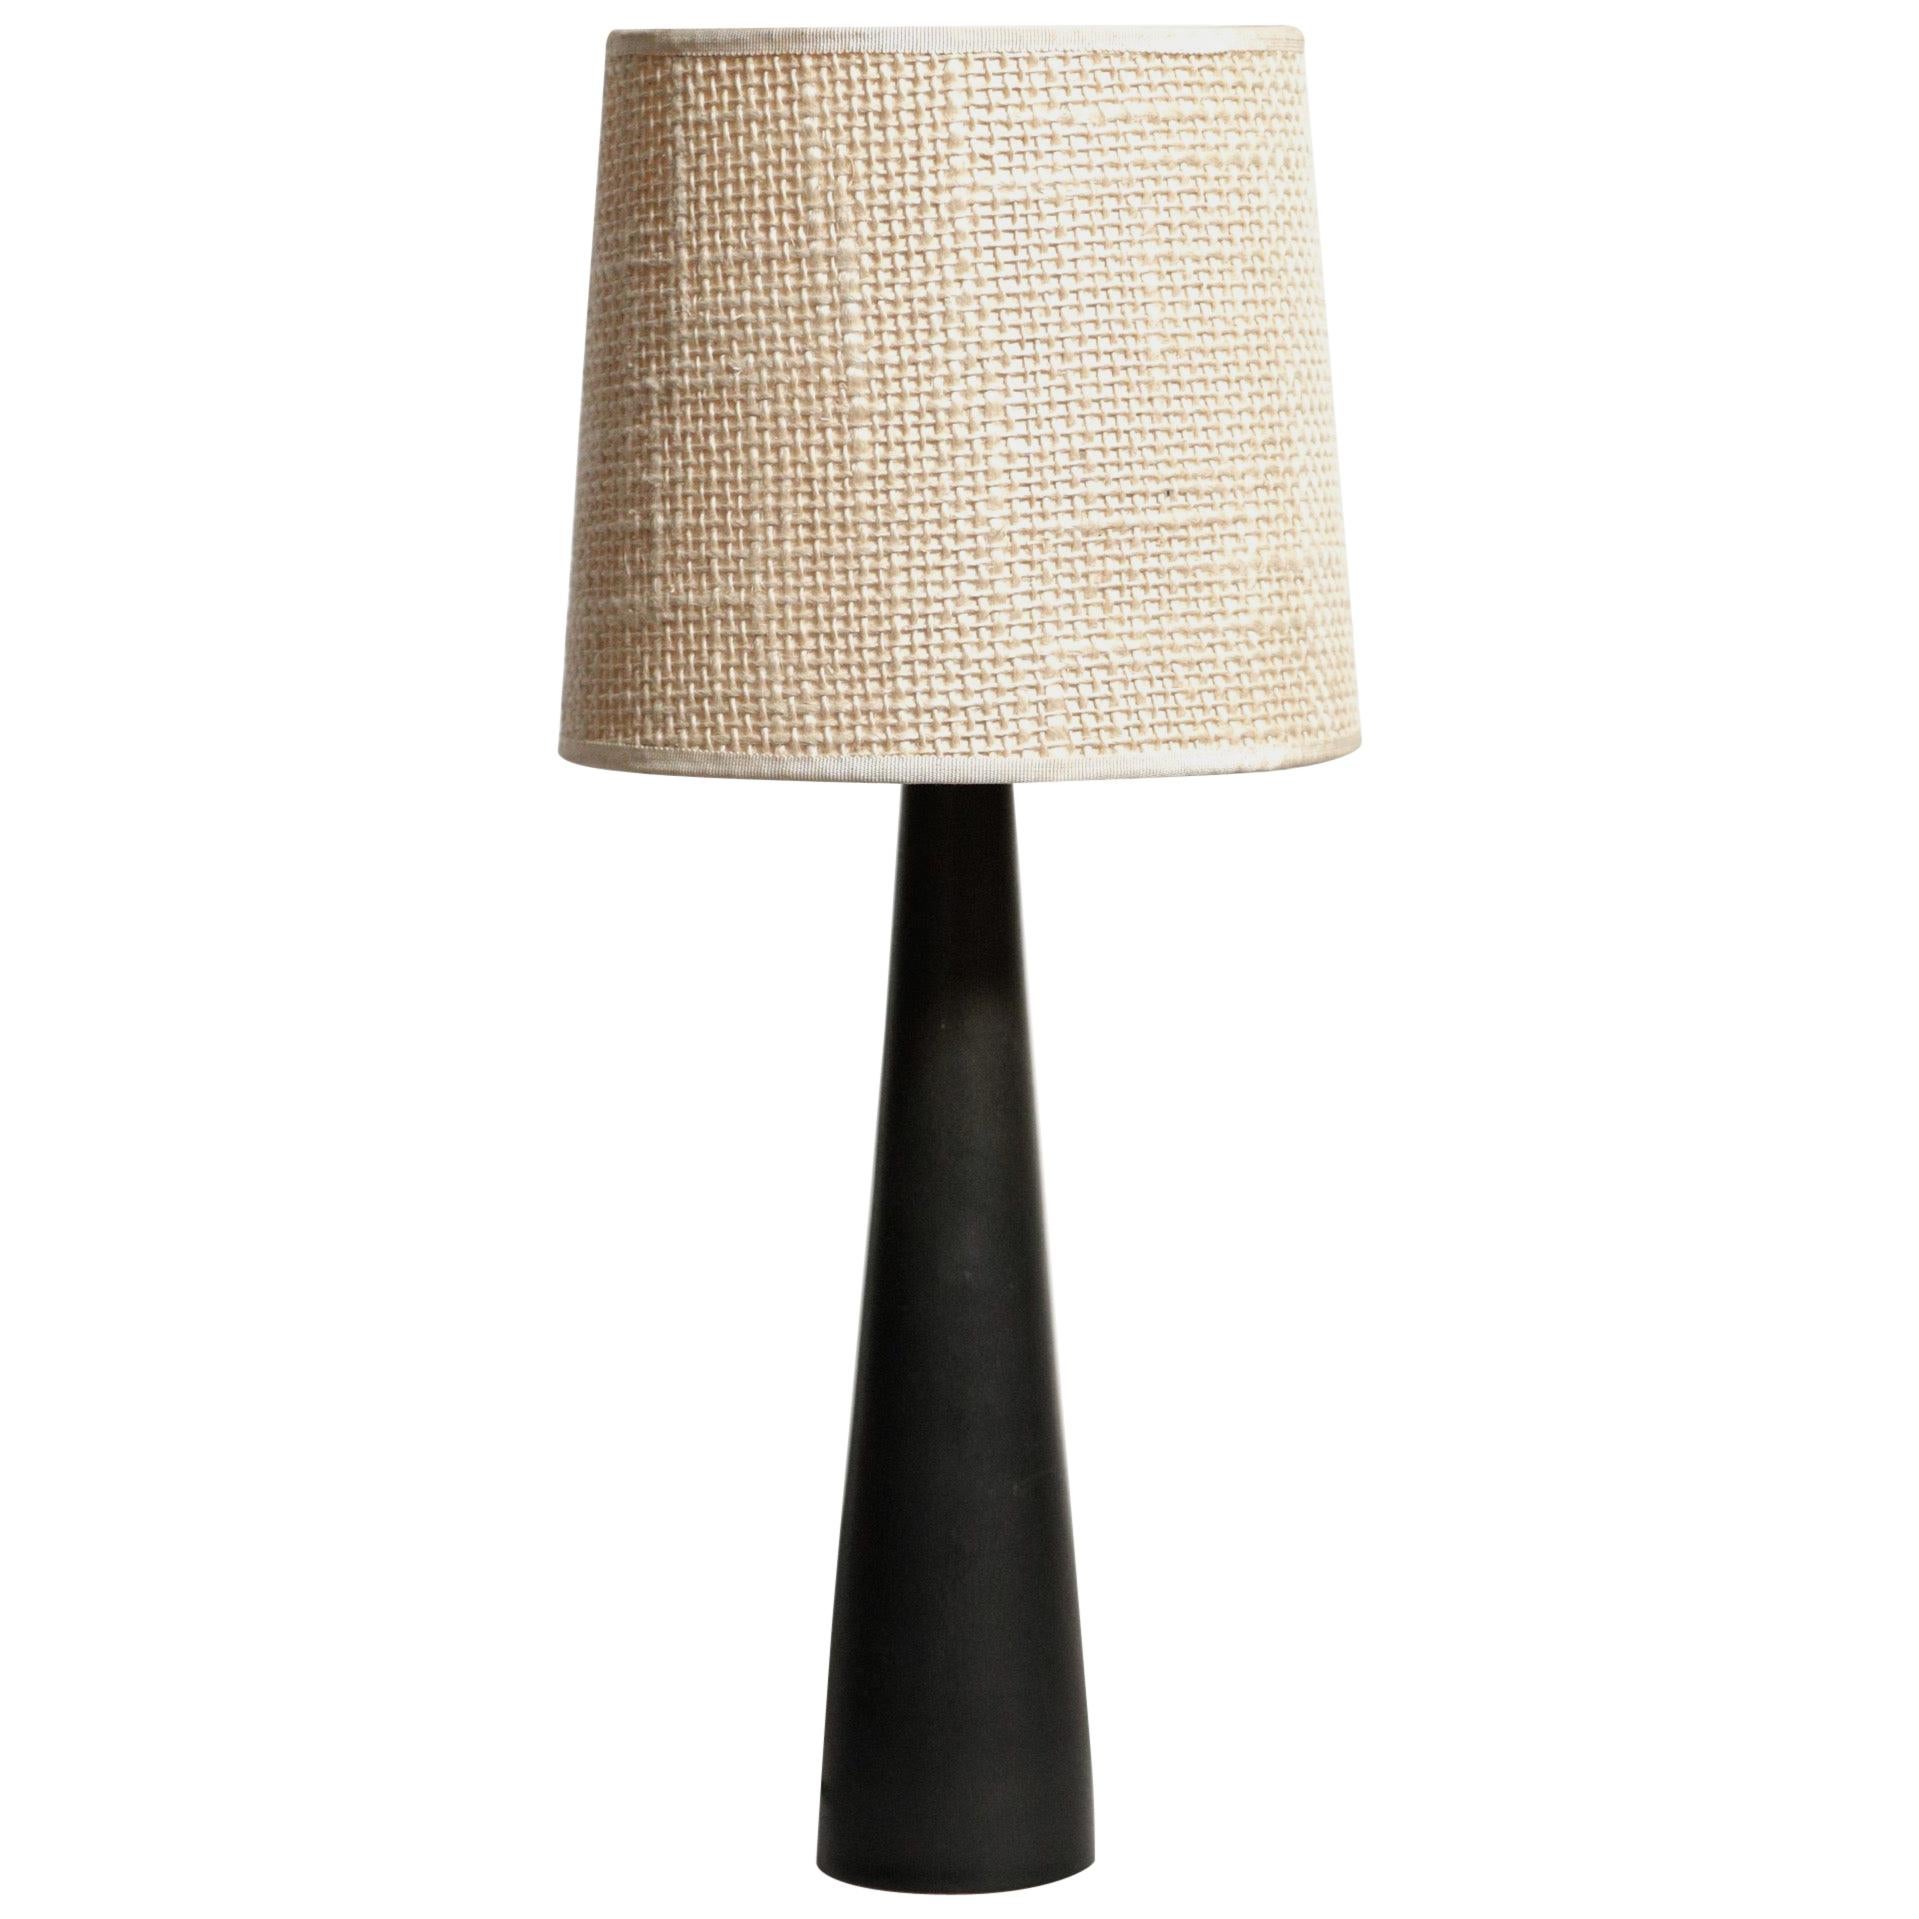 Carl Harry Stalhane Table Lamp with Hare's Fur Glaze and Woven Shade, circa 1955 For Sale